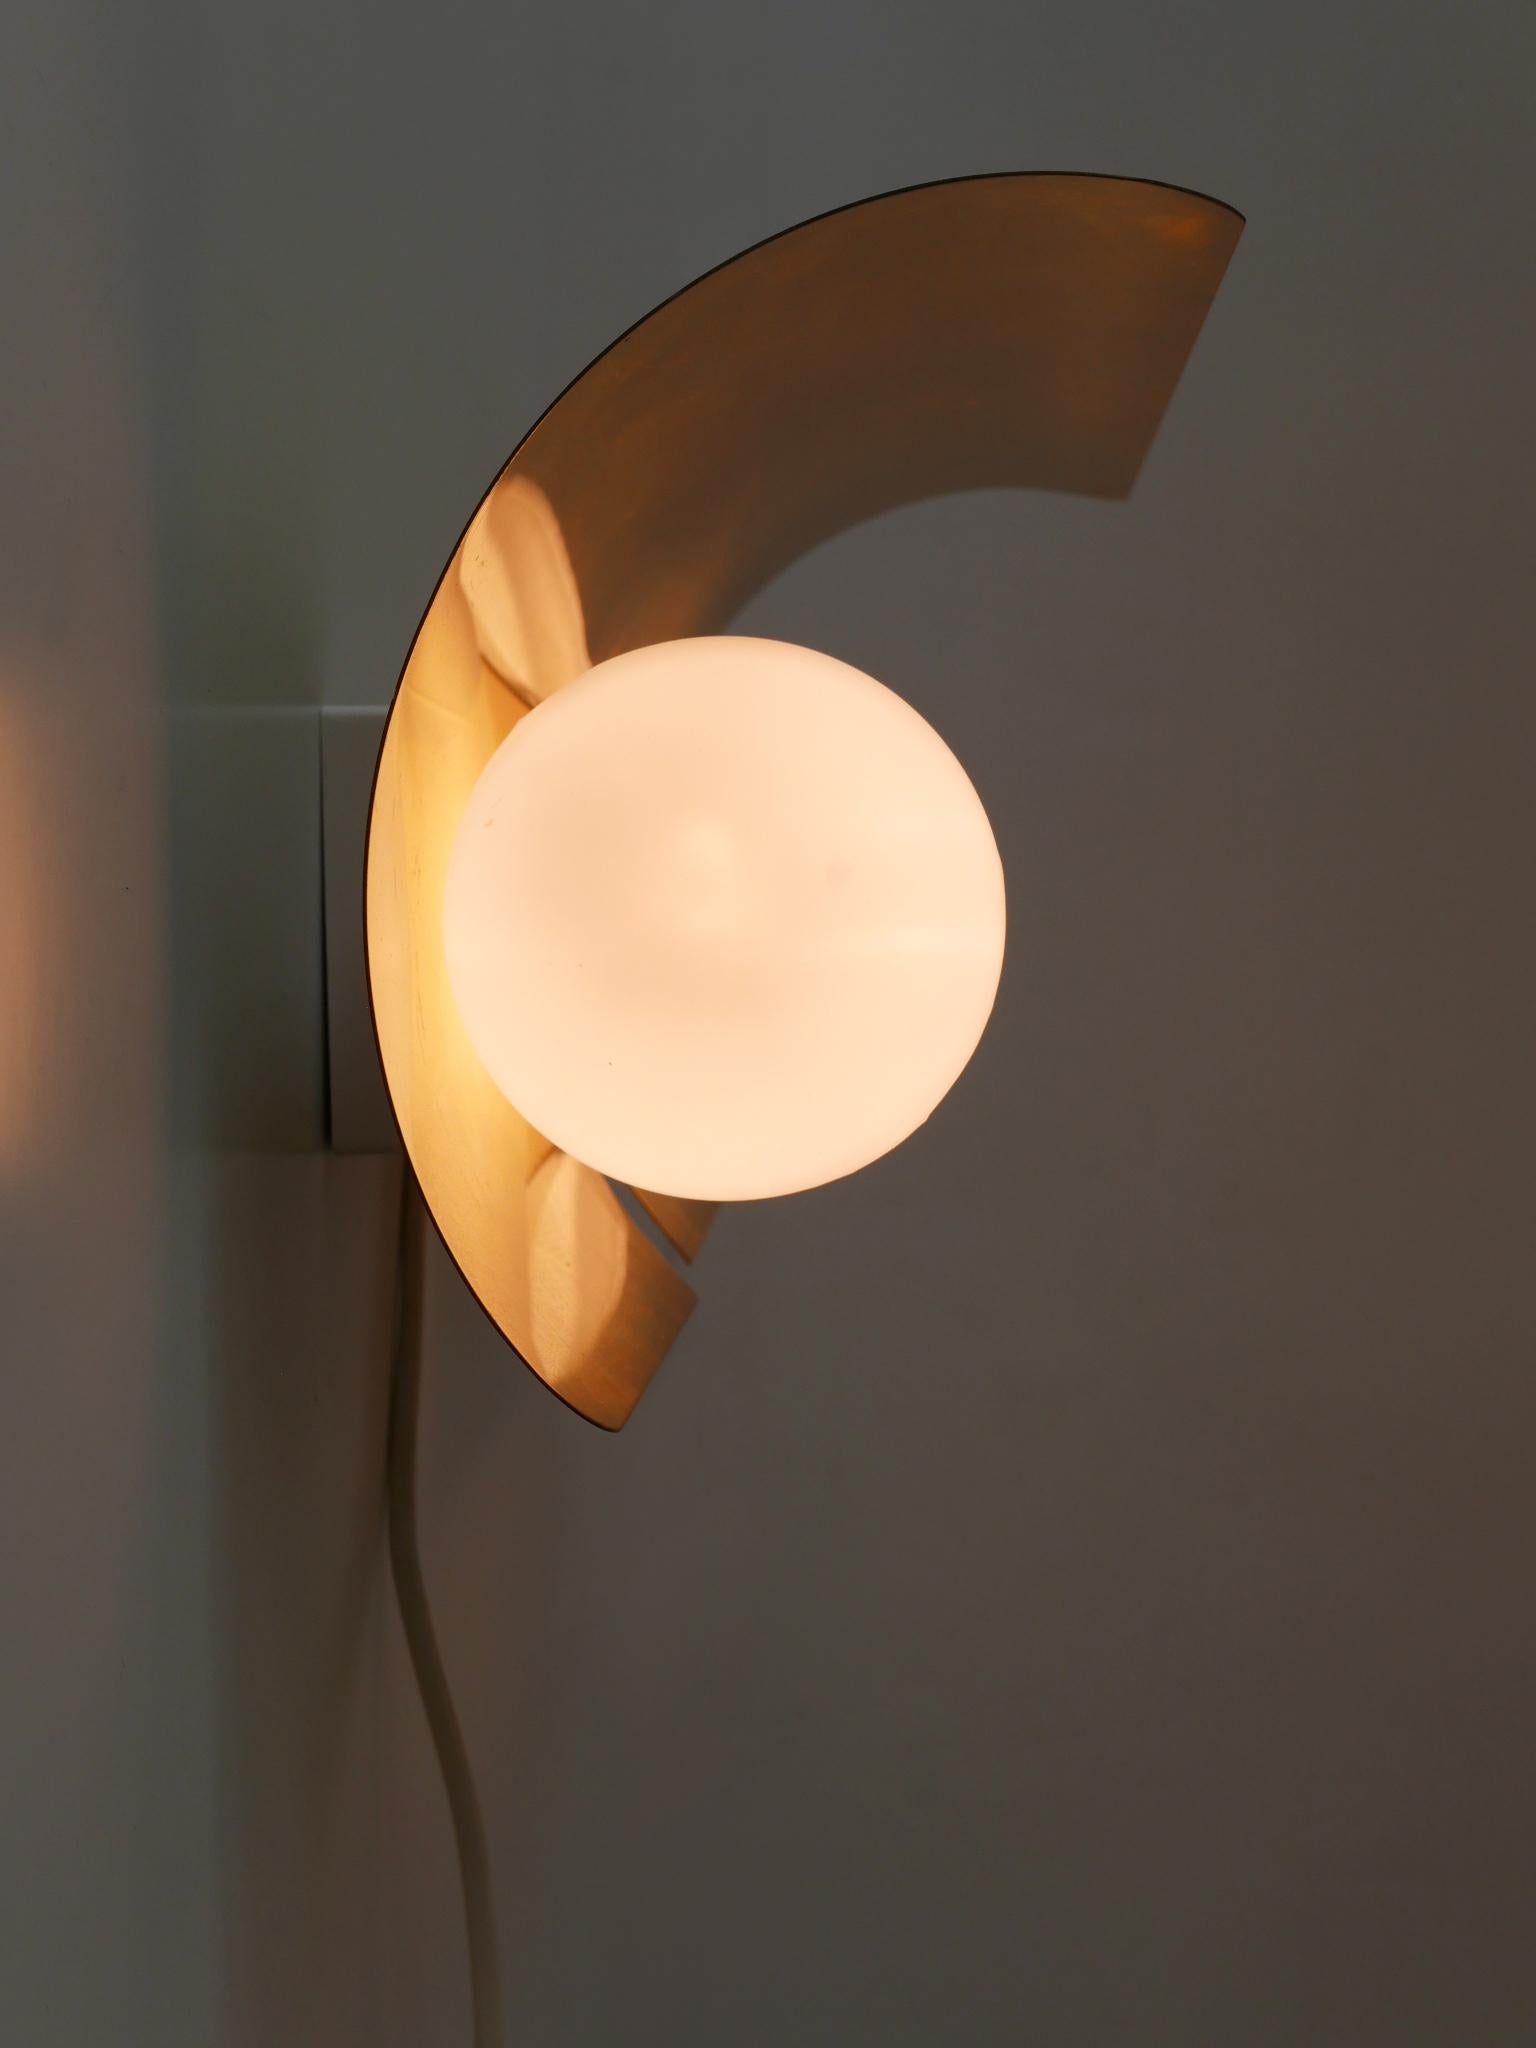 Rare Mid Century Modern Sconce by Hans-Agne Jakobsson for AB Markaryd 1950s For Sale 10